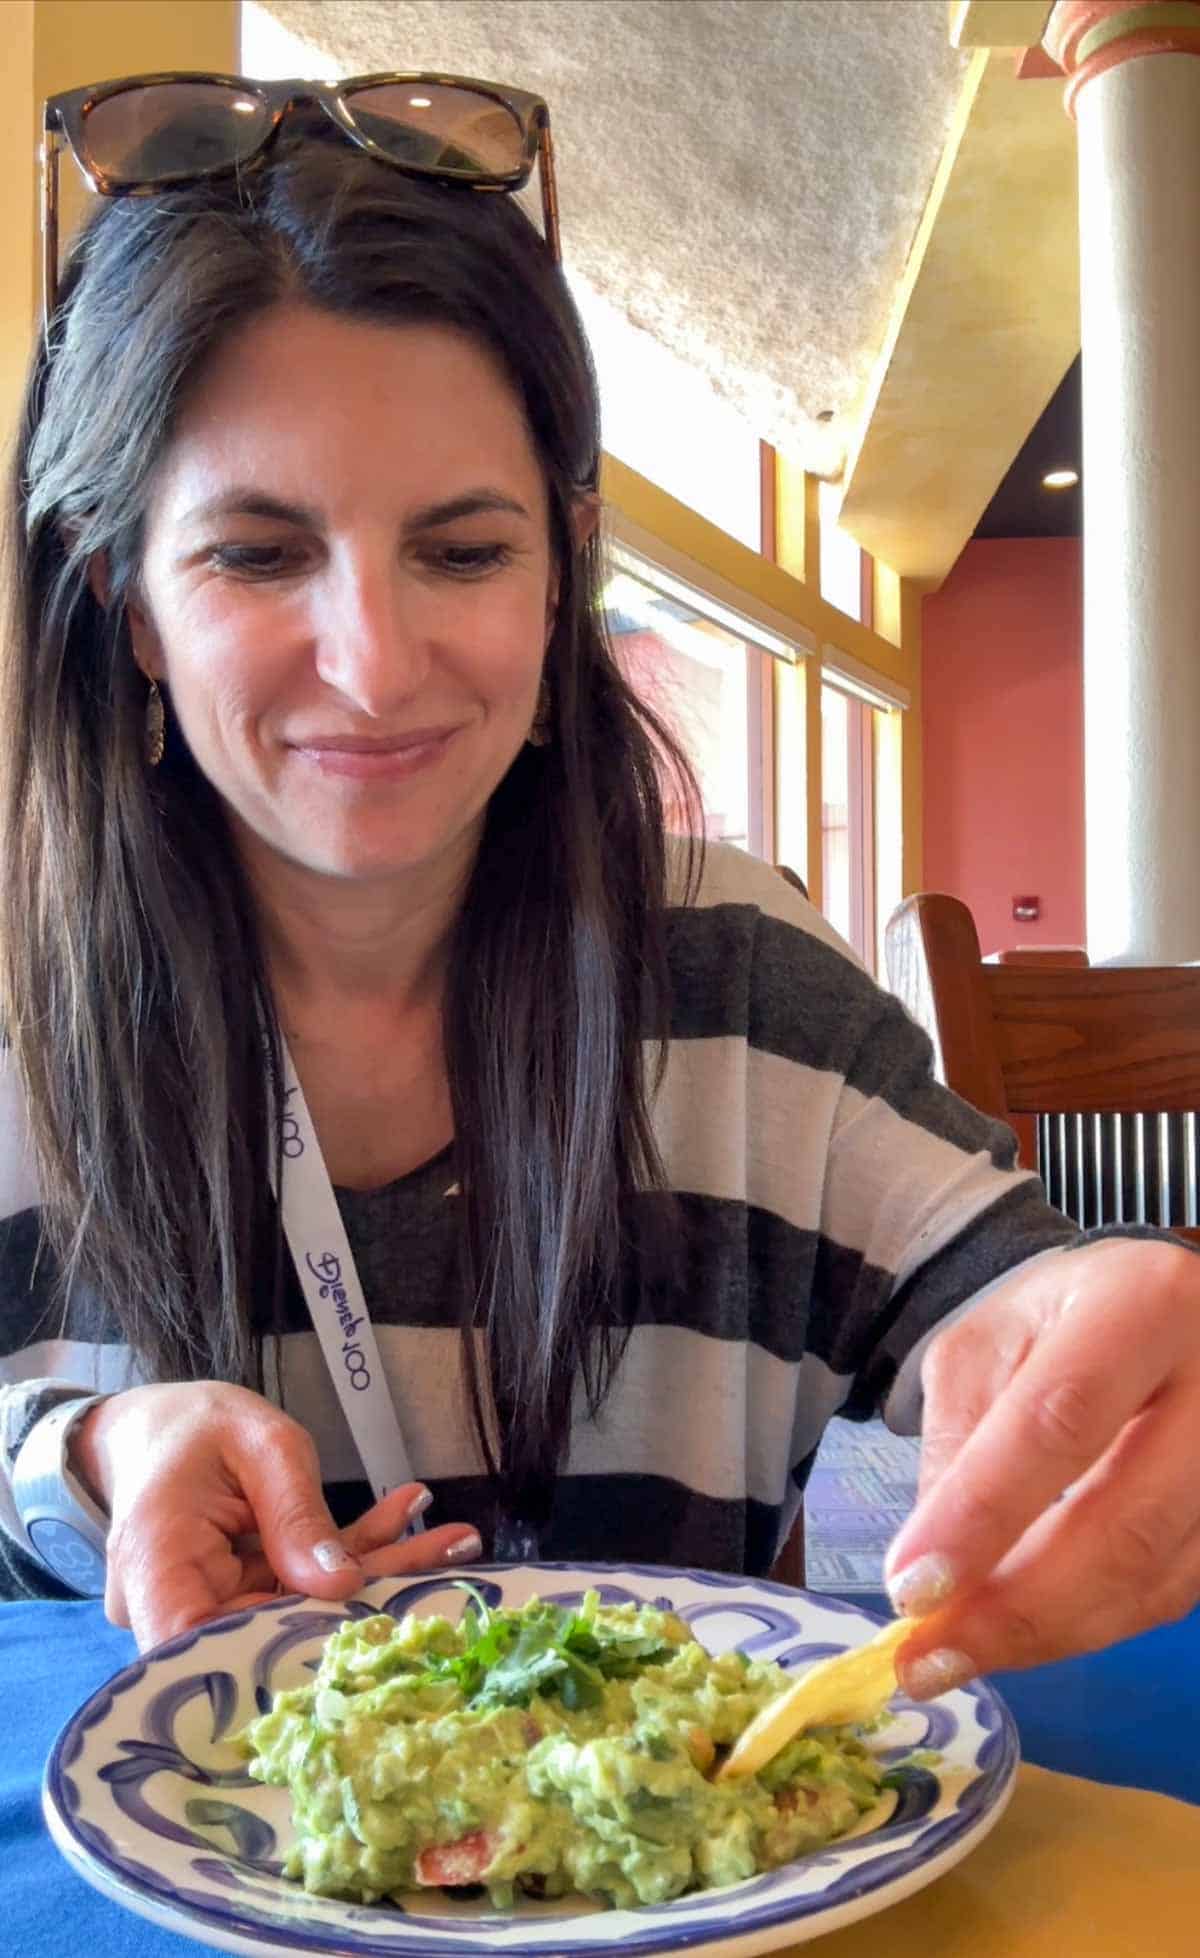 A woman with long brown hair and a striped sweater dipping a chip in a bowl of guacamole.